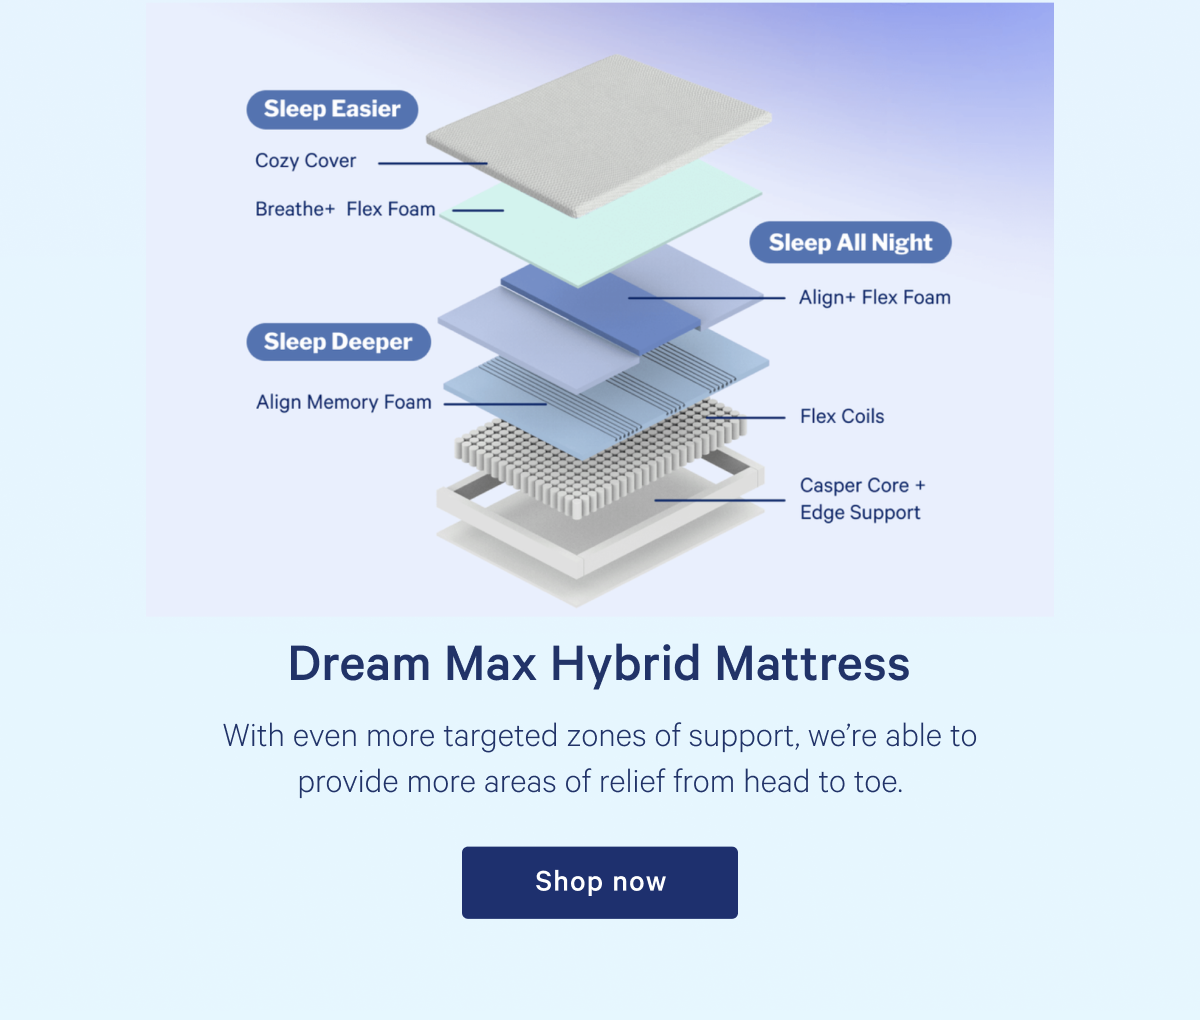 Dream Max Hybrid Mattress >> With even more targeted zones of support, we’re able to provide more areas of relief from head to toe. >> Shop >>